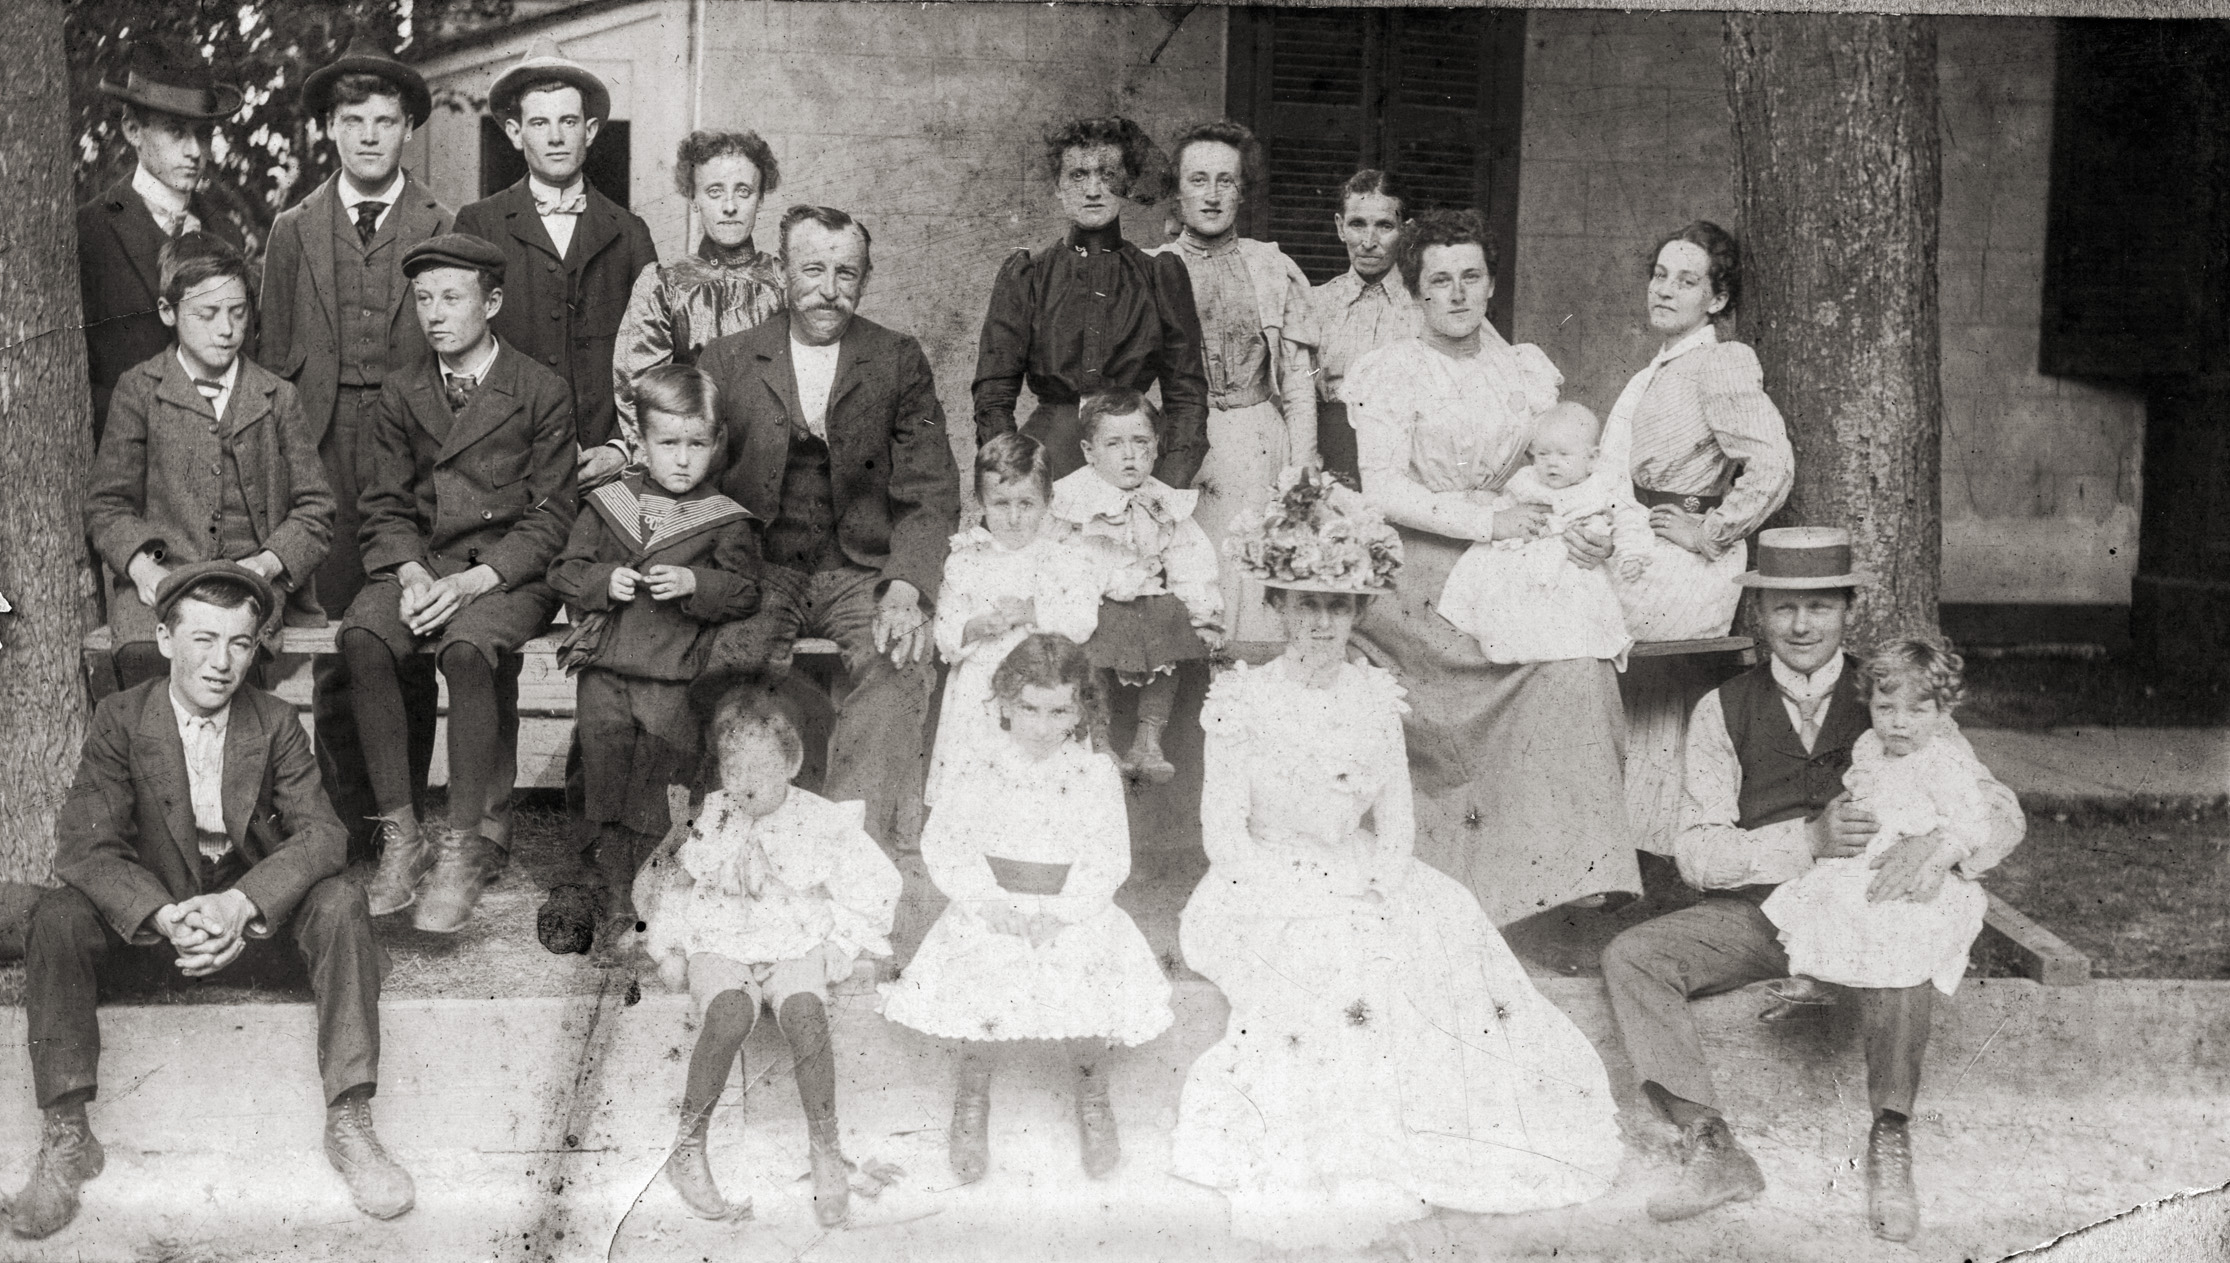 This is a portrait of our extended family circa 1900 at Niagara-on-the-Lake, Canada. They operated the Union Jack Canning Company which during that period canned, under the Union Jack brand, fruits and vegetables from the Niagara Peninsula such as peaches, pears, cherries, tomatoes and green beans. (Framed period labels of the cannery adorn our kitchen wall.) I remember my dad and his cousin Elizabeth from Niagara finding and opening a can of tomatoes from the cannery in the late sixties - it looked O.K - but nobody dared to try it.

Second from left in the second row is my paternal grandfather, who ran a grocery store in Niagara from the early 1910s to the 1960s - seen here with me as a kid sitting on the front store steps in the late 1950s. Next to him, the child, I believe, is the future first head of Regional Niagara government in the late-1960s. View full size.